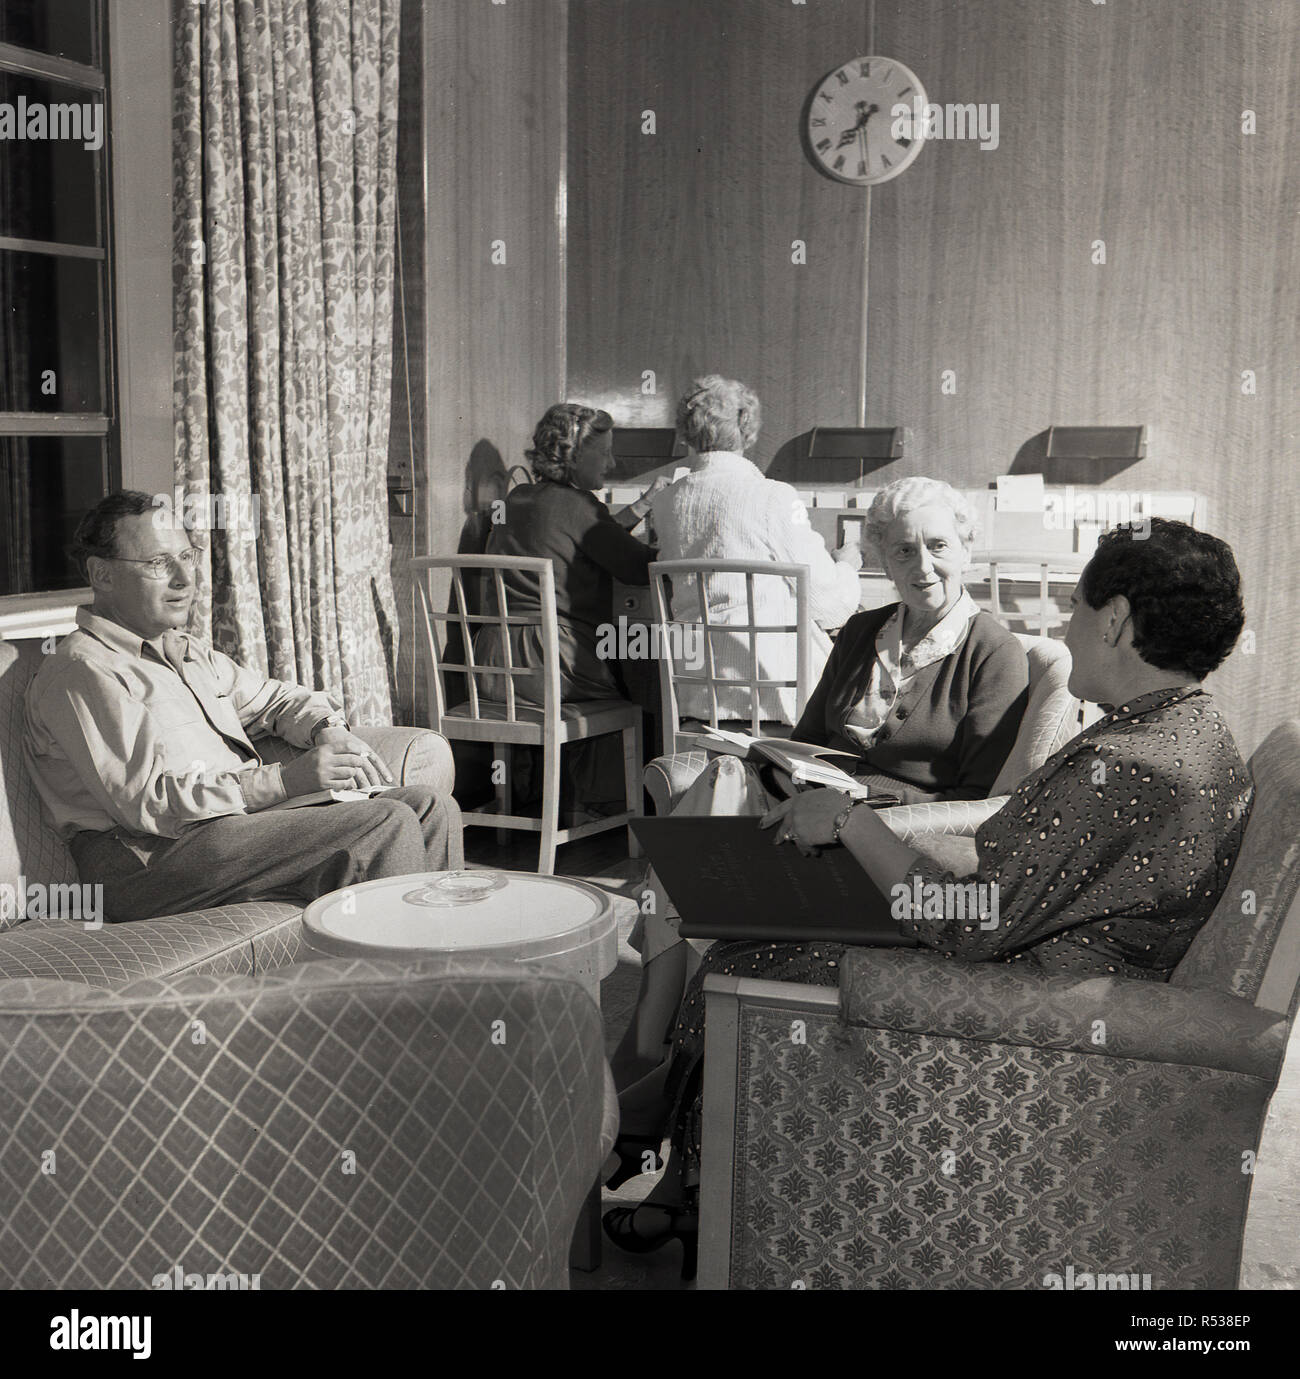 1950s, historical, early evening and several adult passengers onboard a union-castle steamship sitting together relaxing in comfortable chairs inside a ship's lounge. Stock Photo